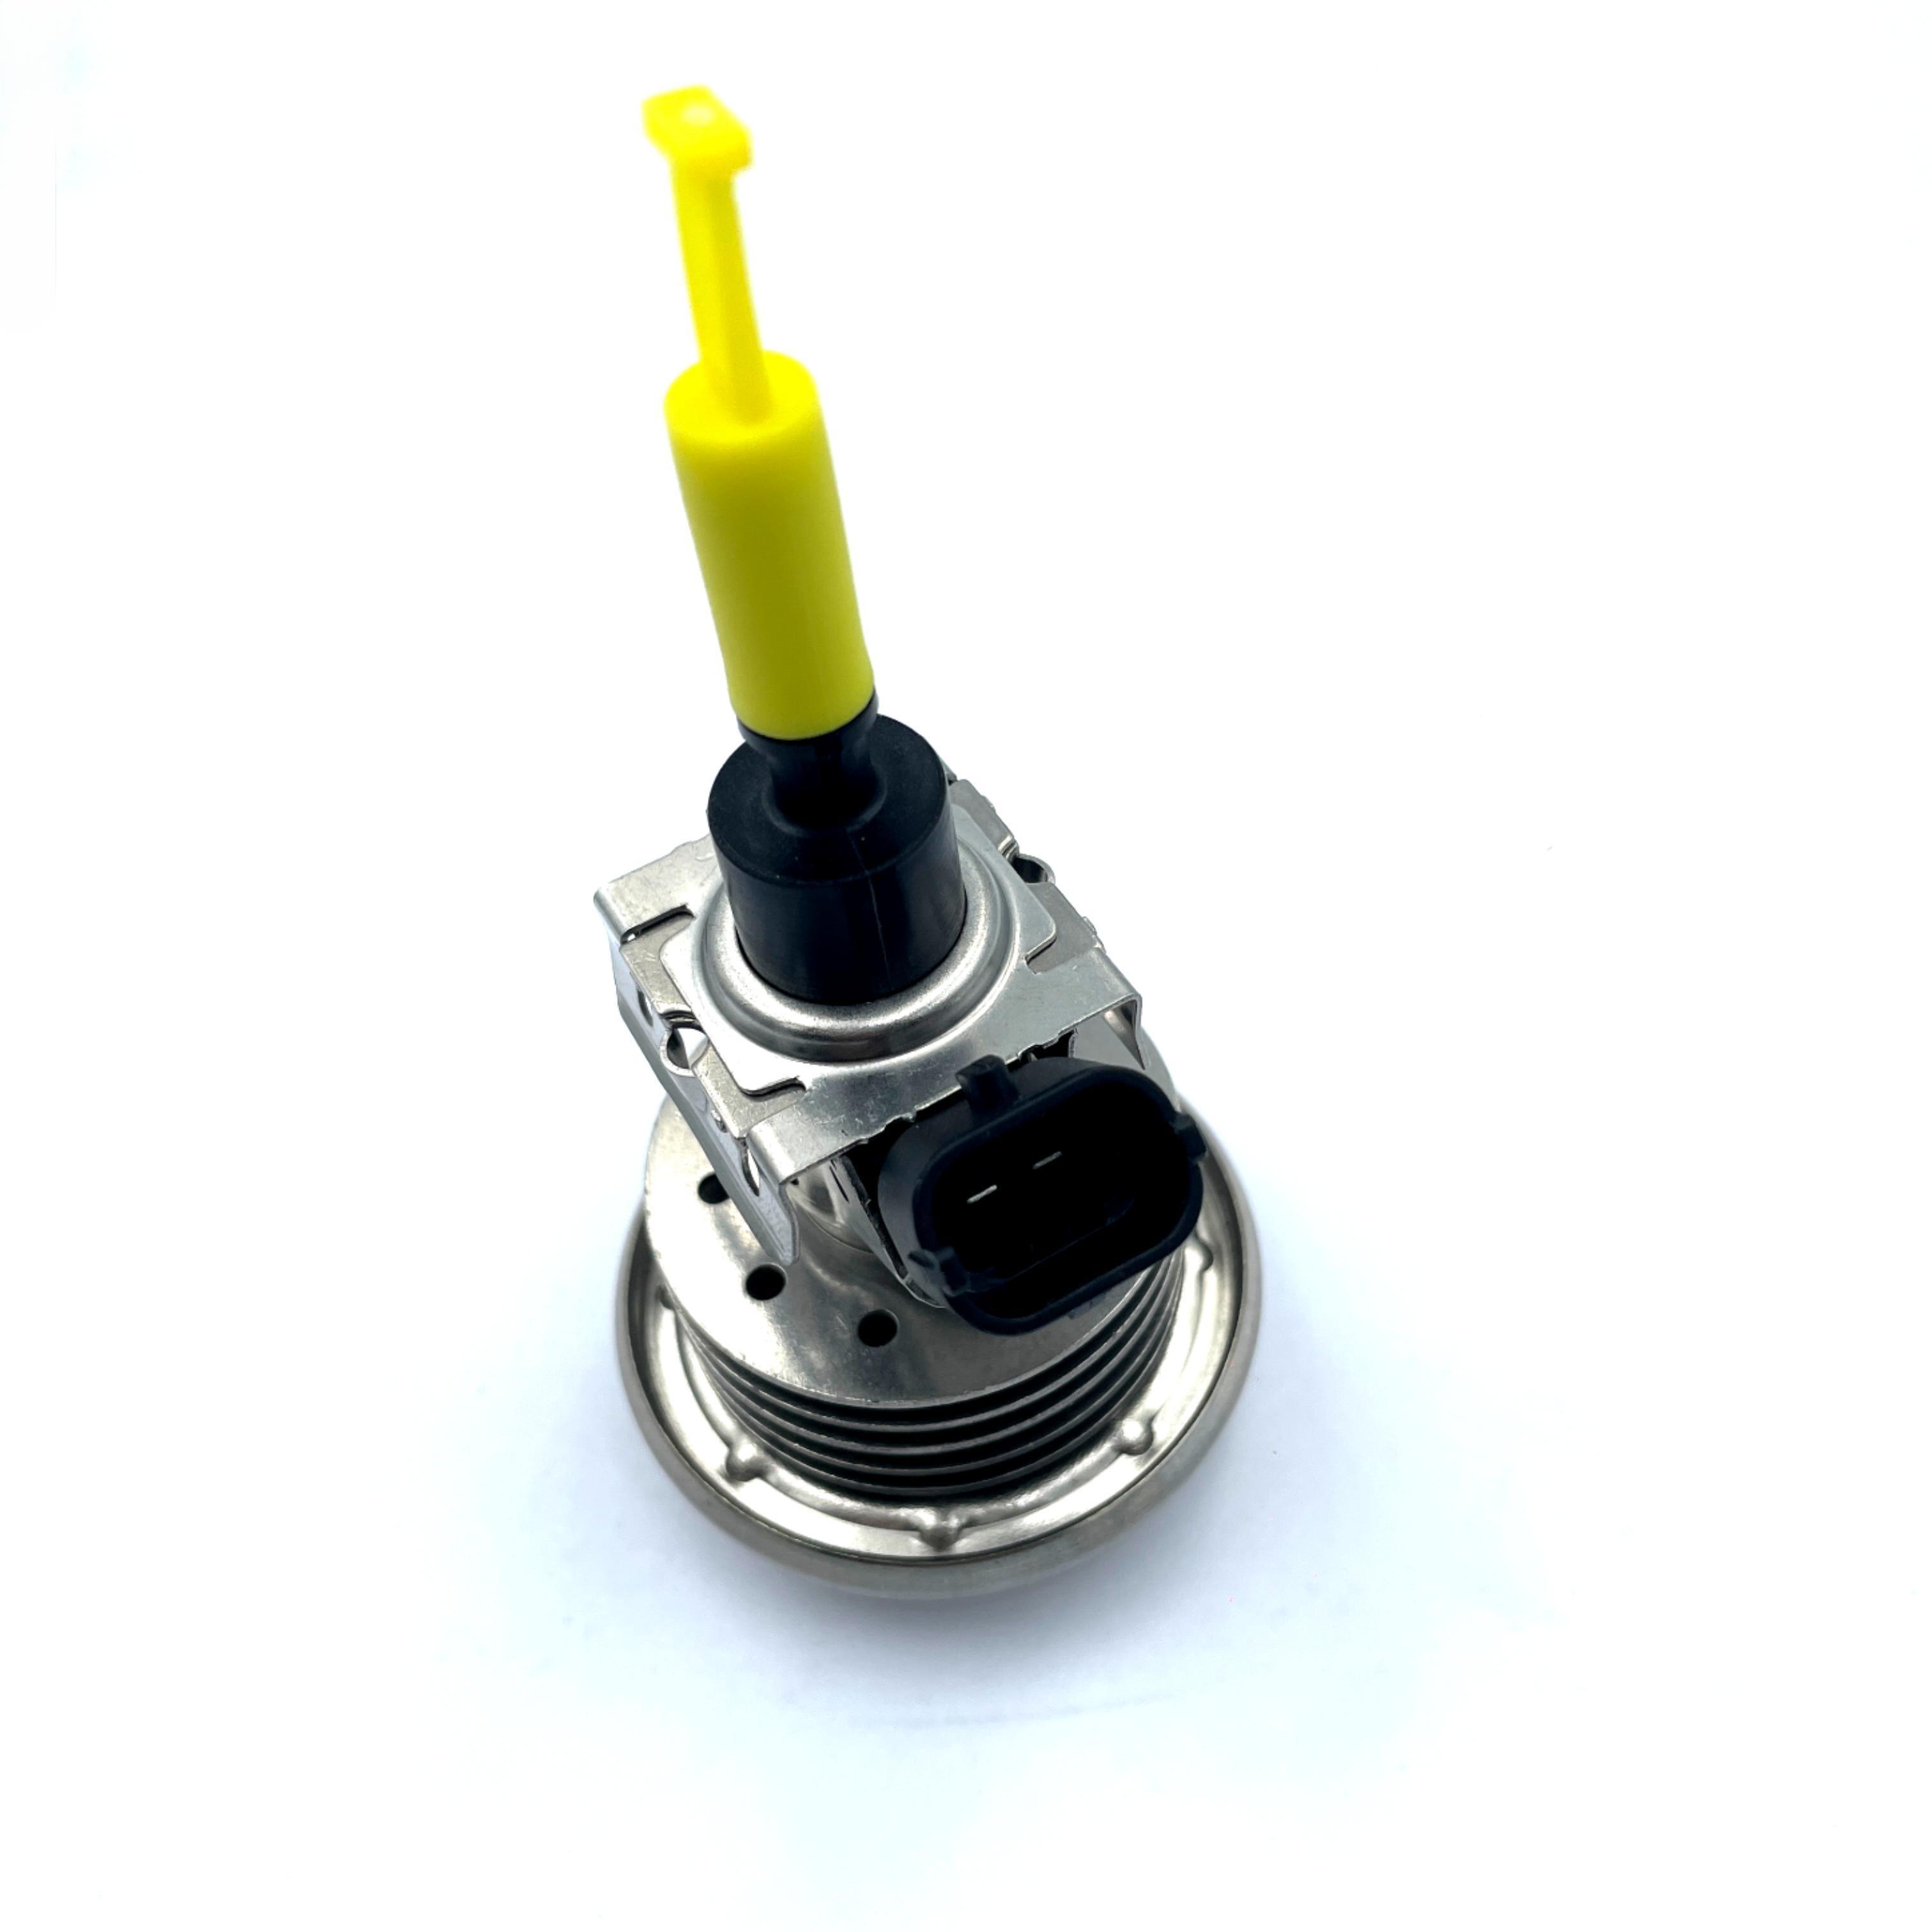 Applicable to Mercedes-Benz Volkswagen Ford urea pump nozzle assembly 0444021021 0444021046